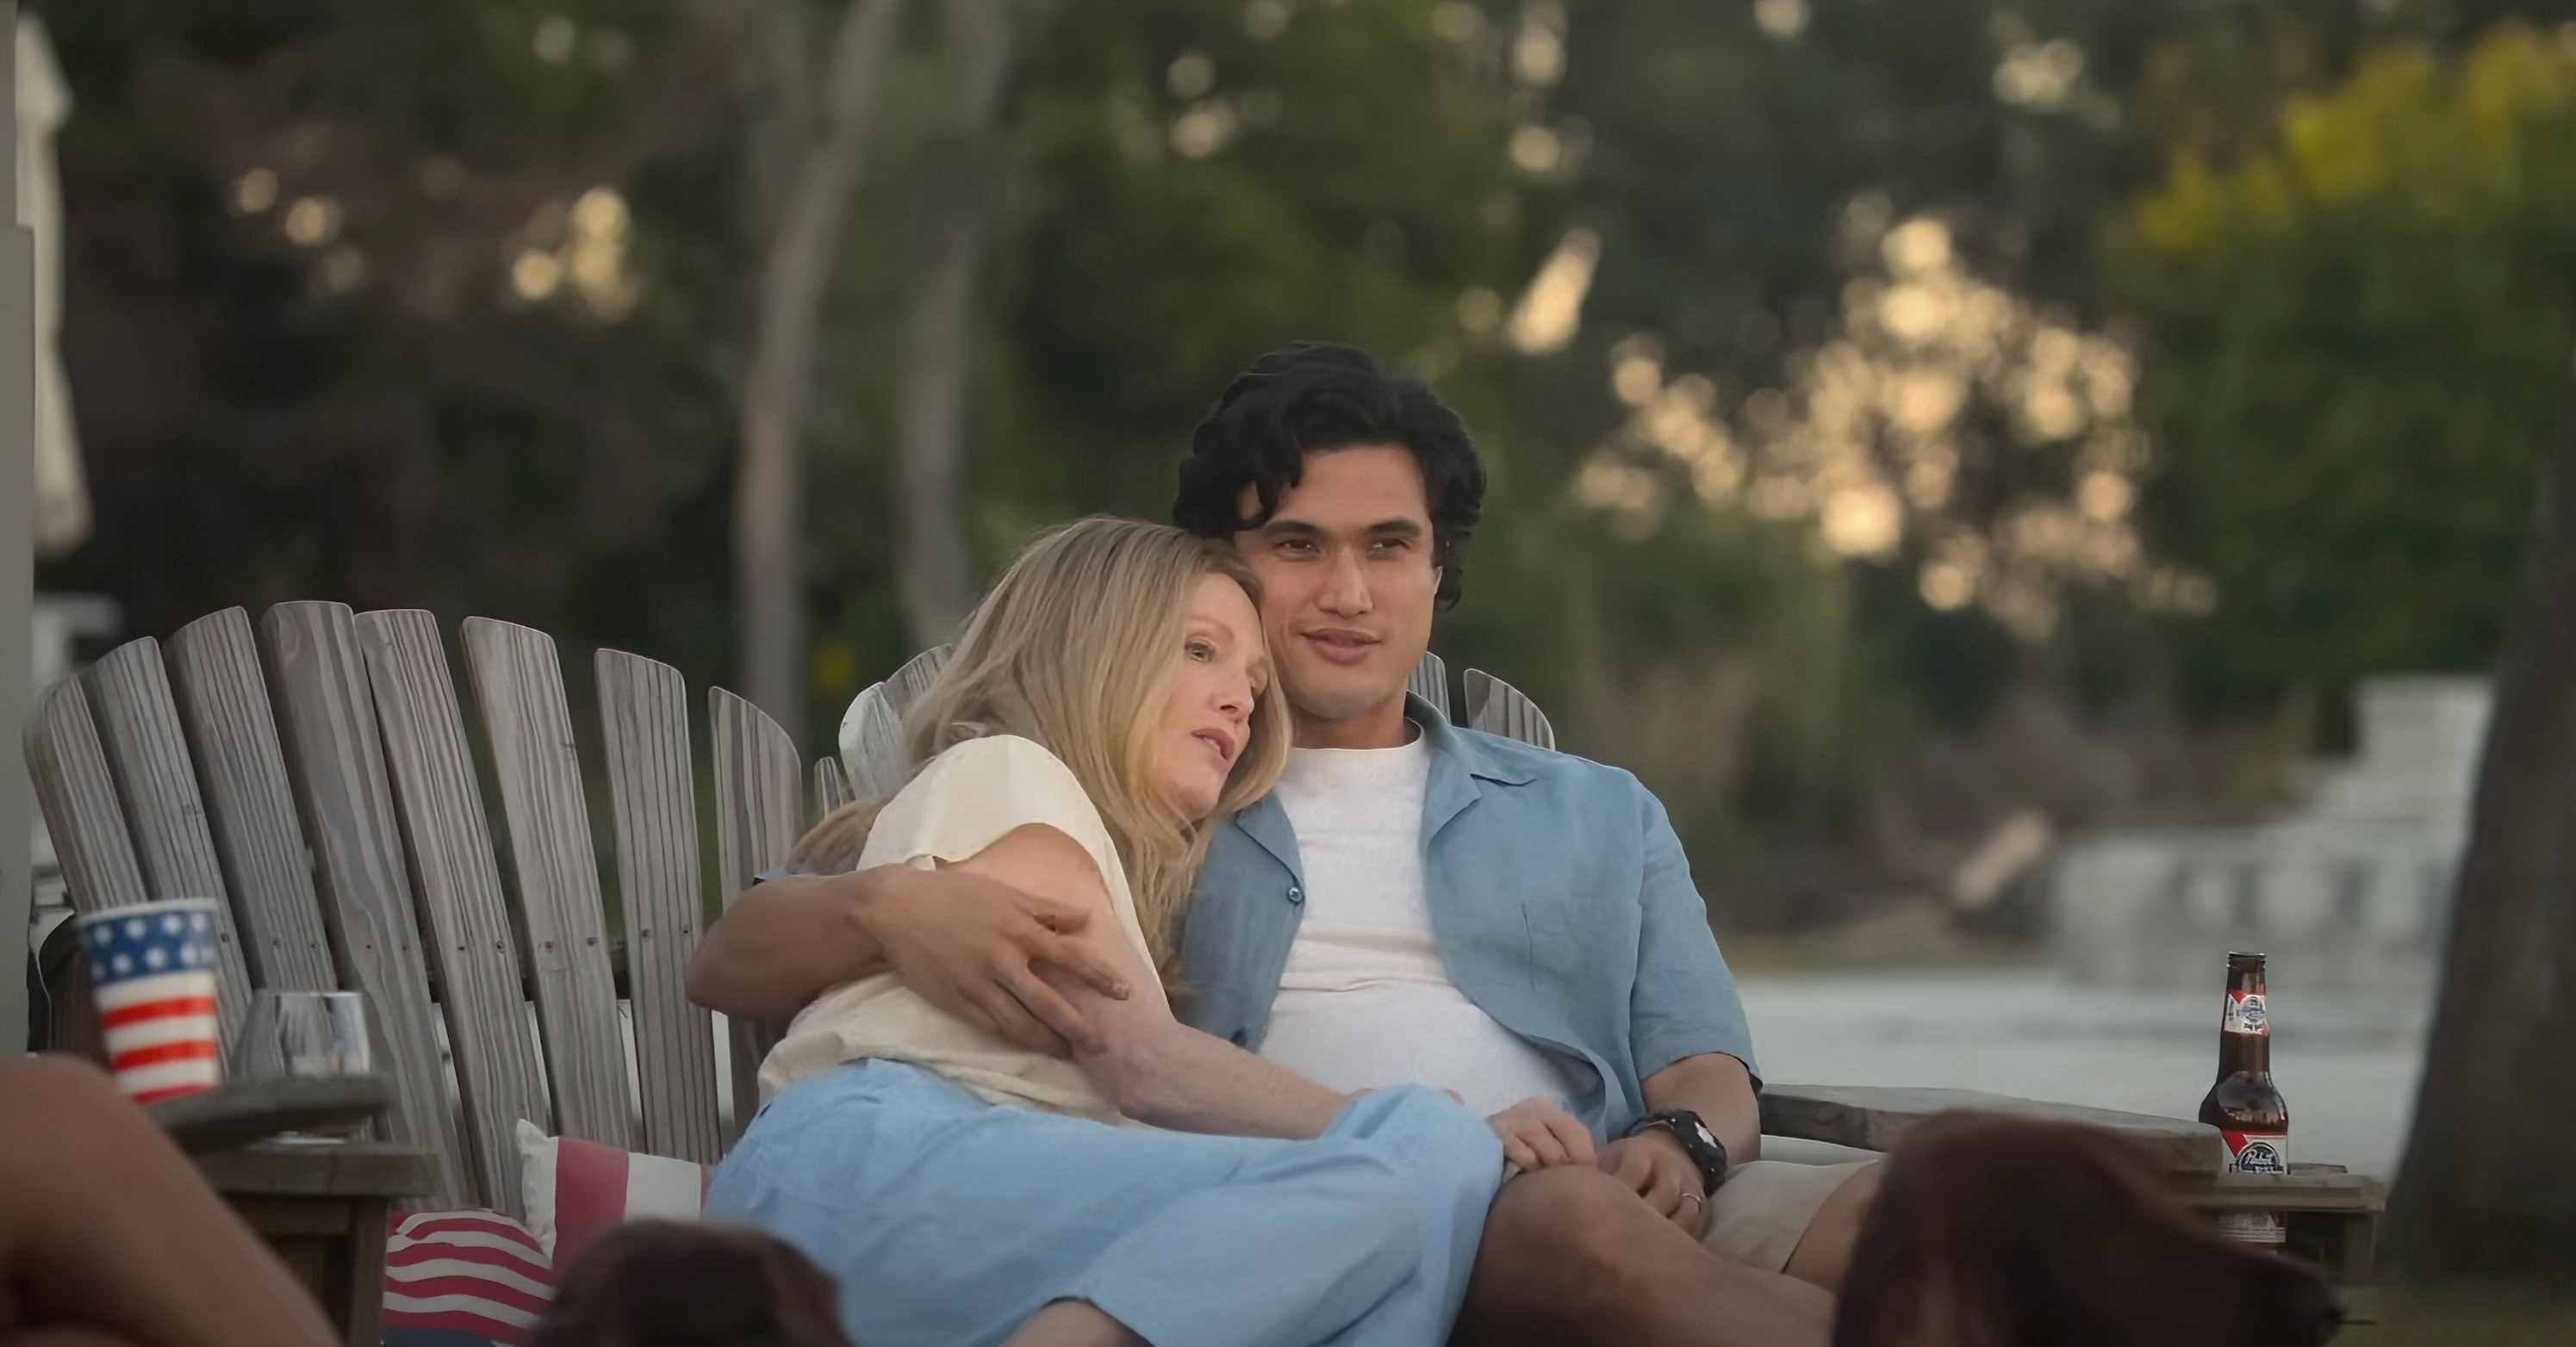 Julianne and Charles cuddling on garden chairs in a scene from from &quot;May December&quot;